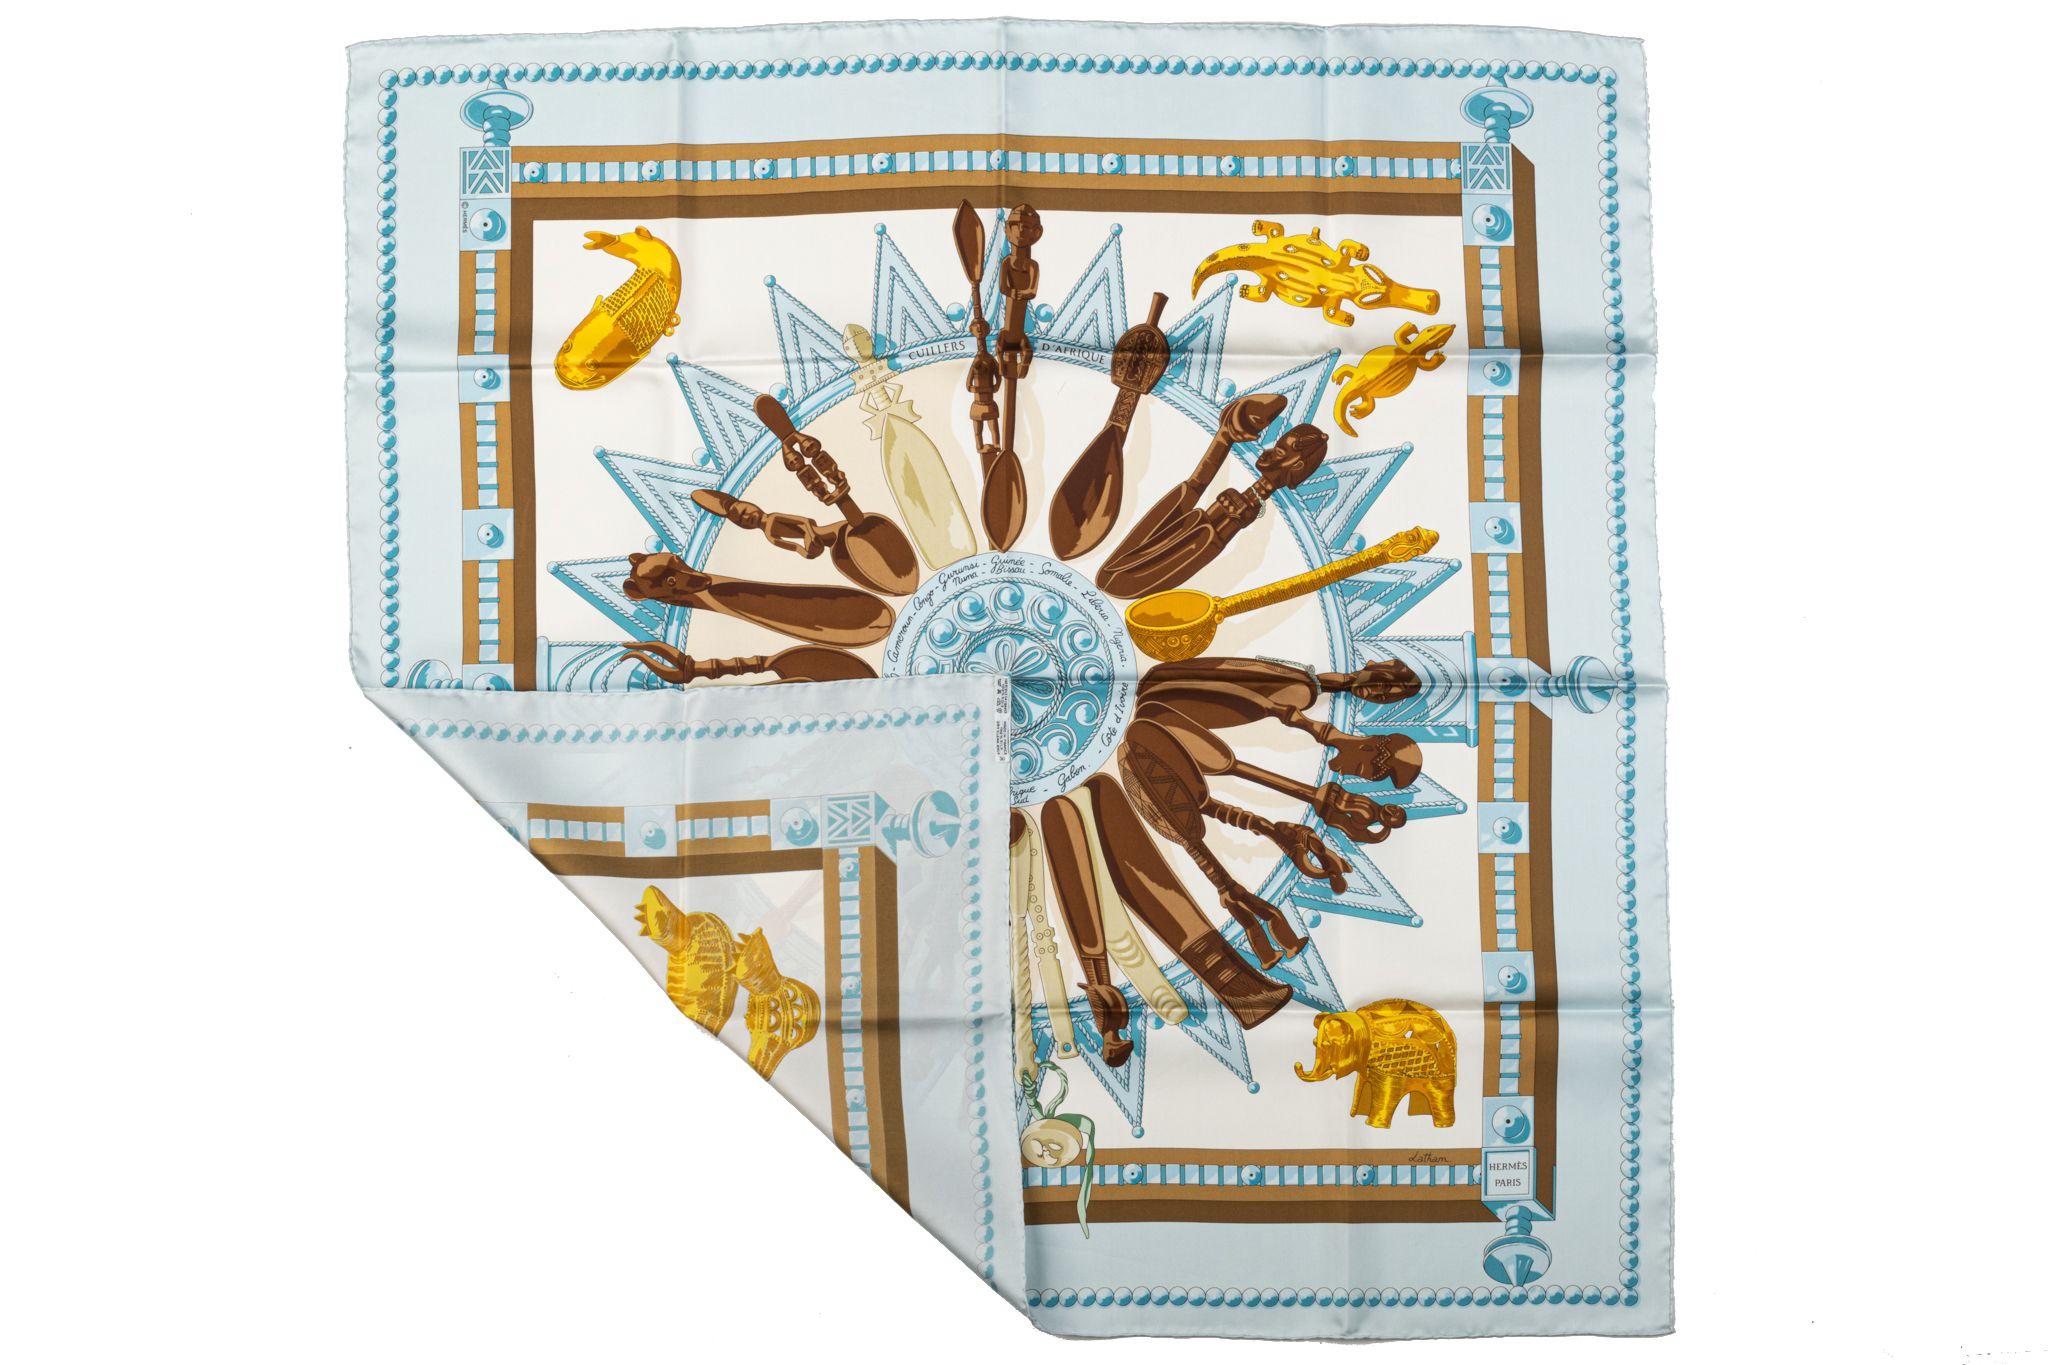 Hermès Cuillers d'Afrique light blue silk scarf by Latham. Dry clean only. Does not include box.